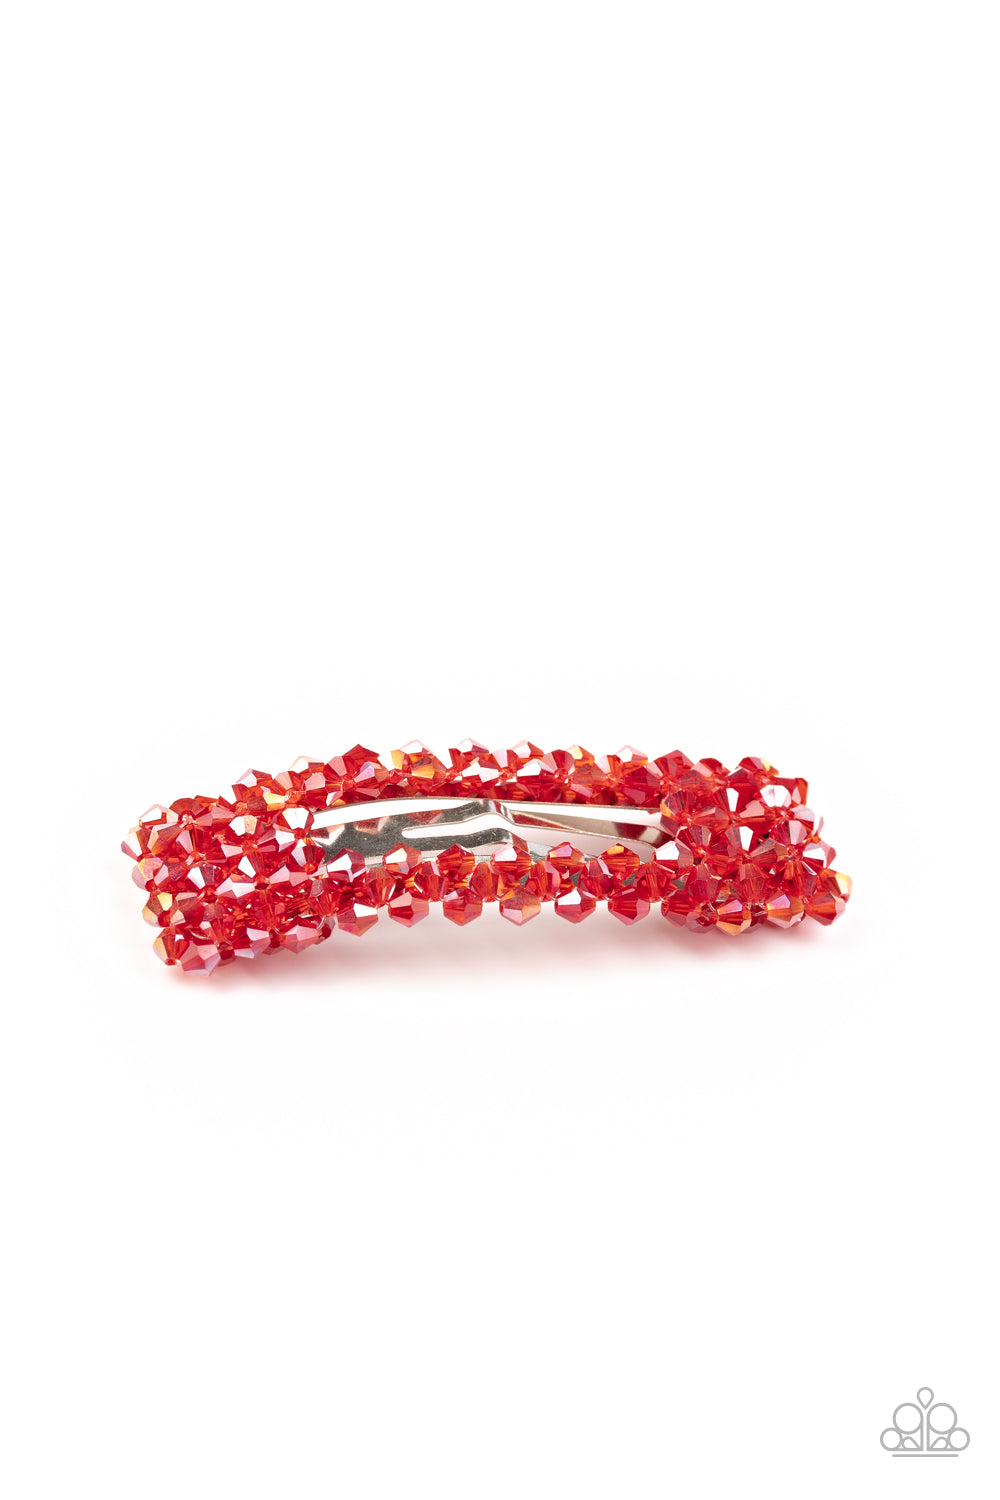 Paparazzi Hair Clip ~ No Filter - Red Hair Clip with red crystal-like beads with snap clip 